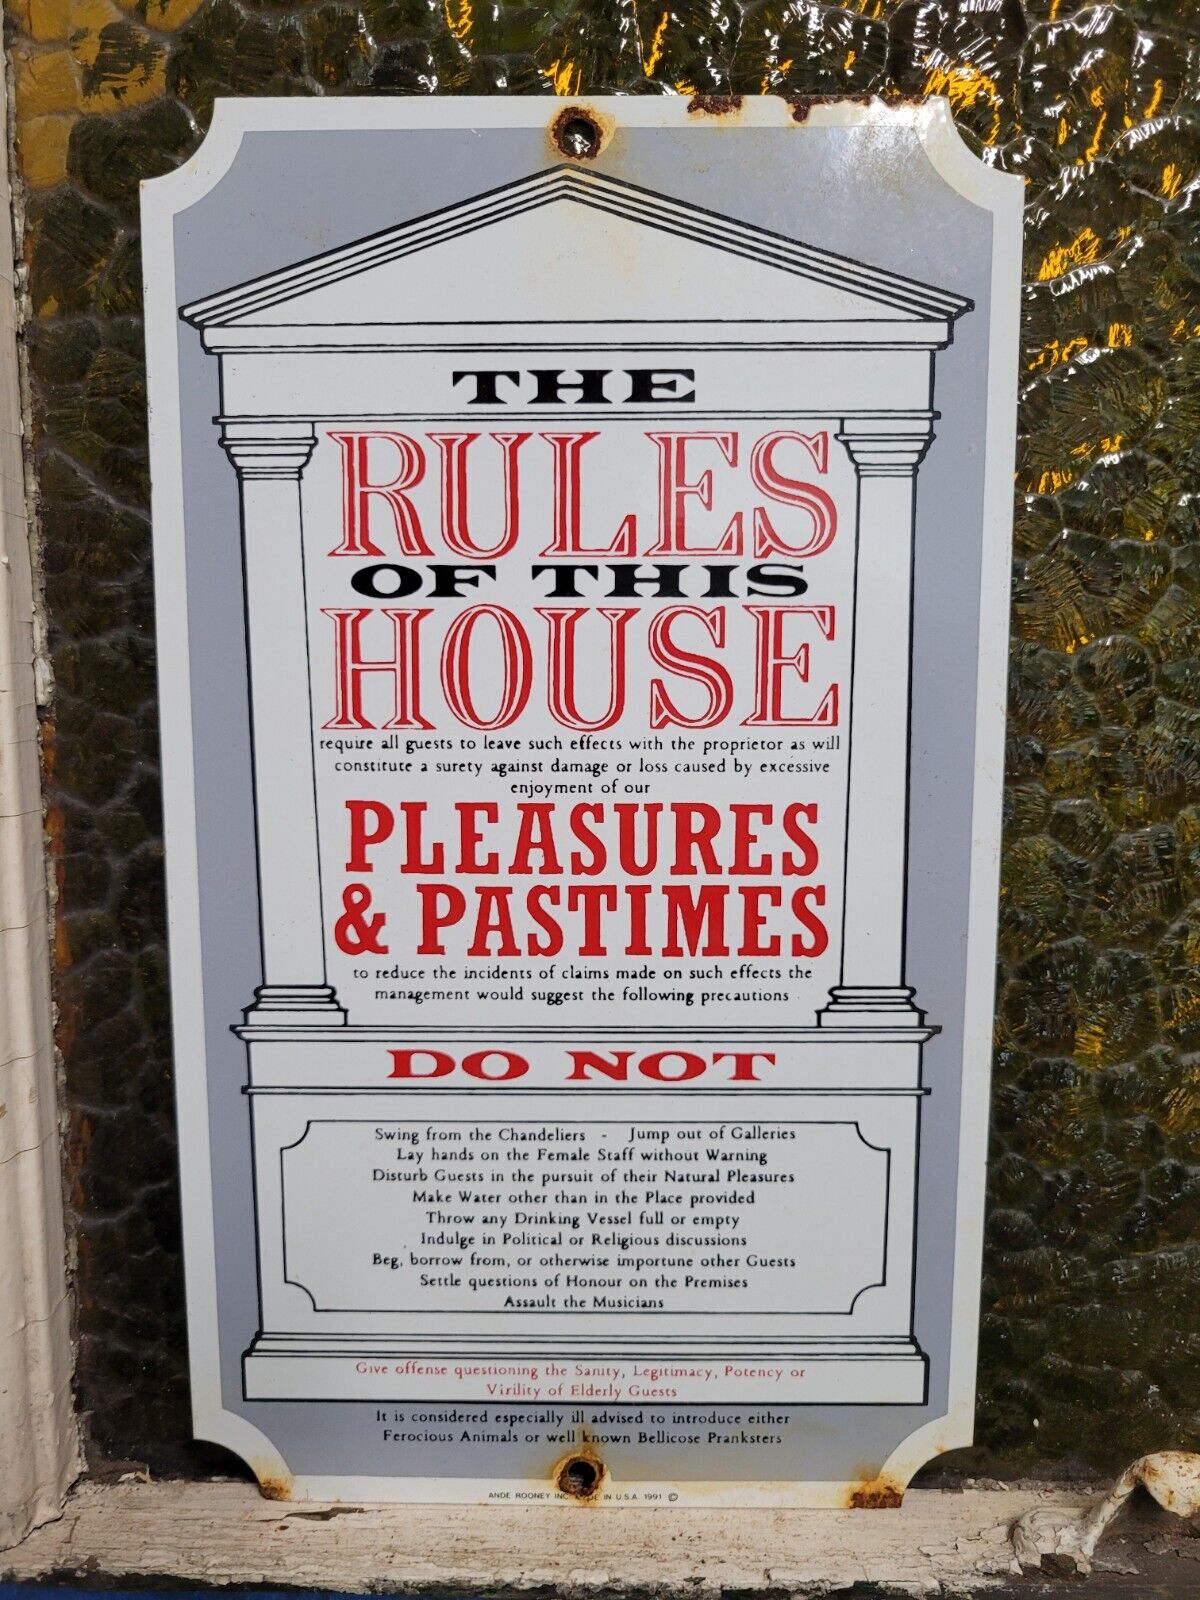 VINTAGE PORCELAIN SIGN OLDE TIME RULES OF THE HOUSE PLEASURES PASTIMES DO NOT